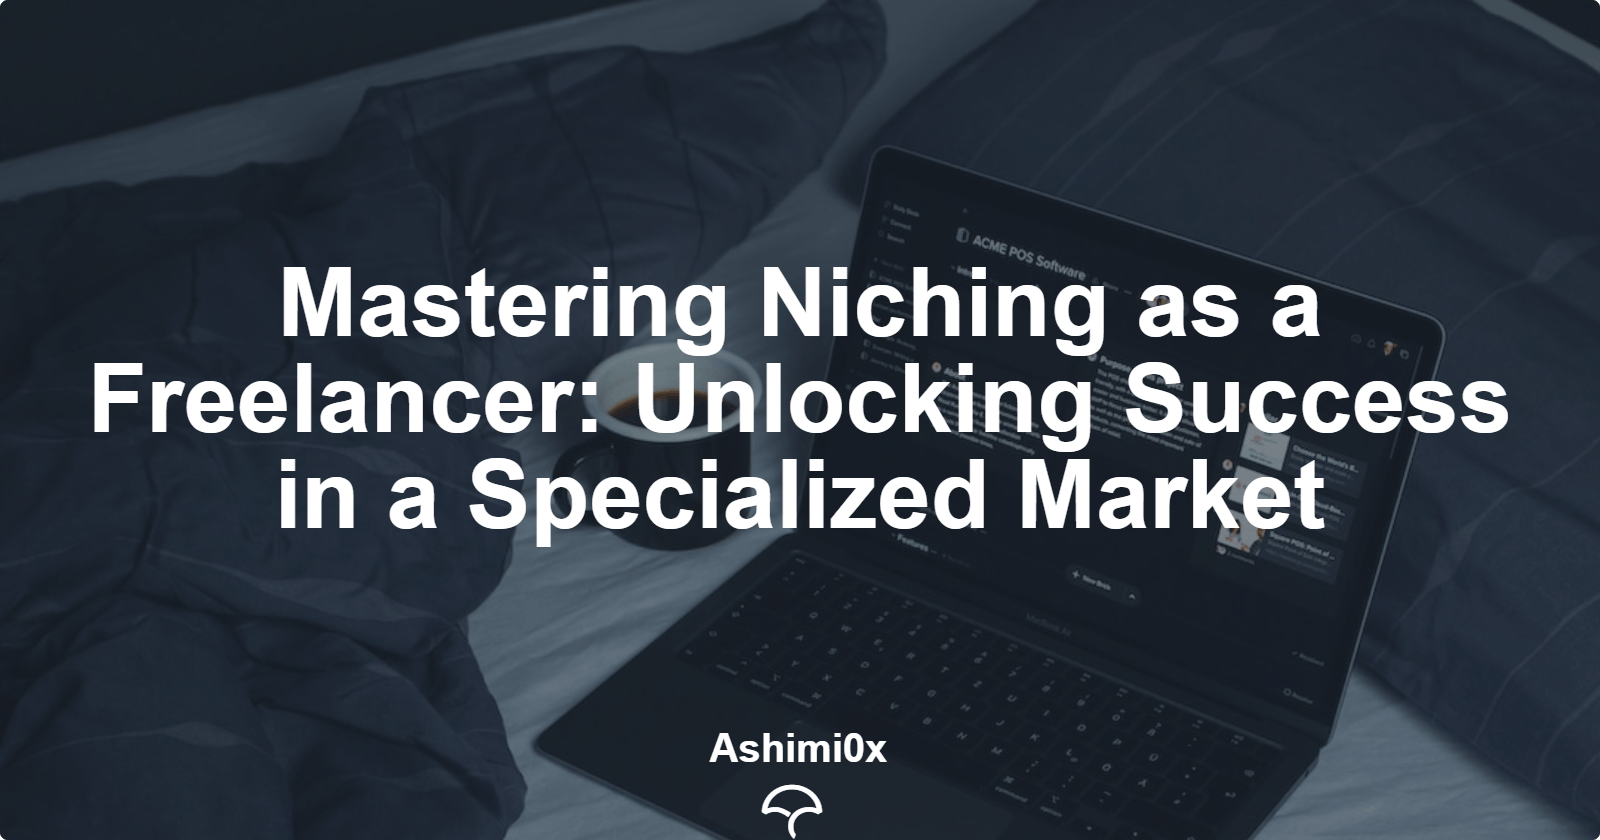 Mastering Niching as a Freelancer: Unlocking Success in a Specialized Market